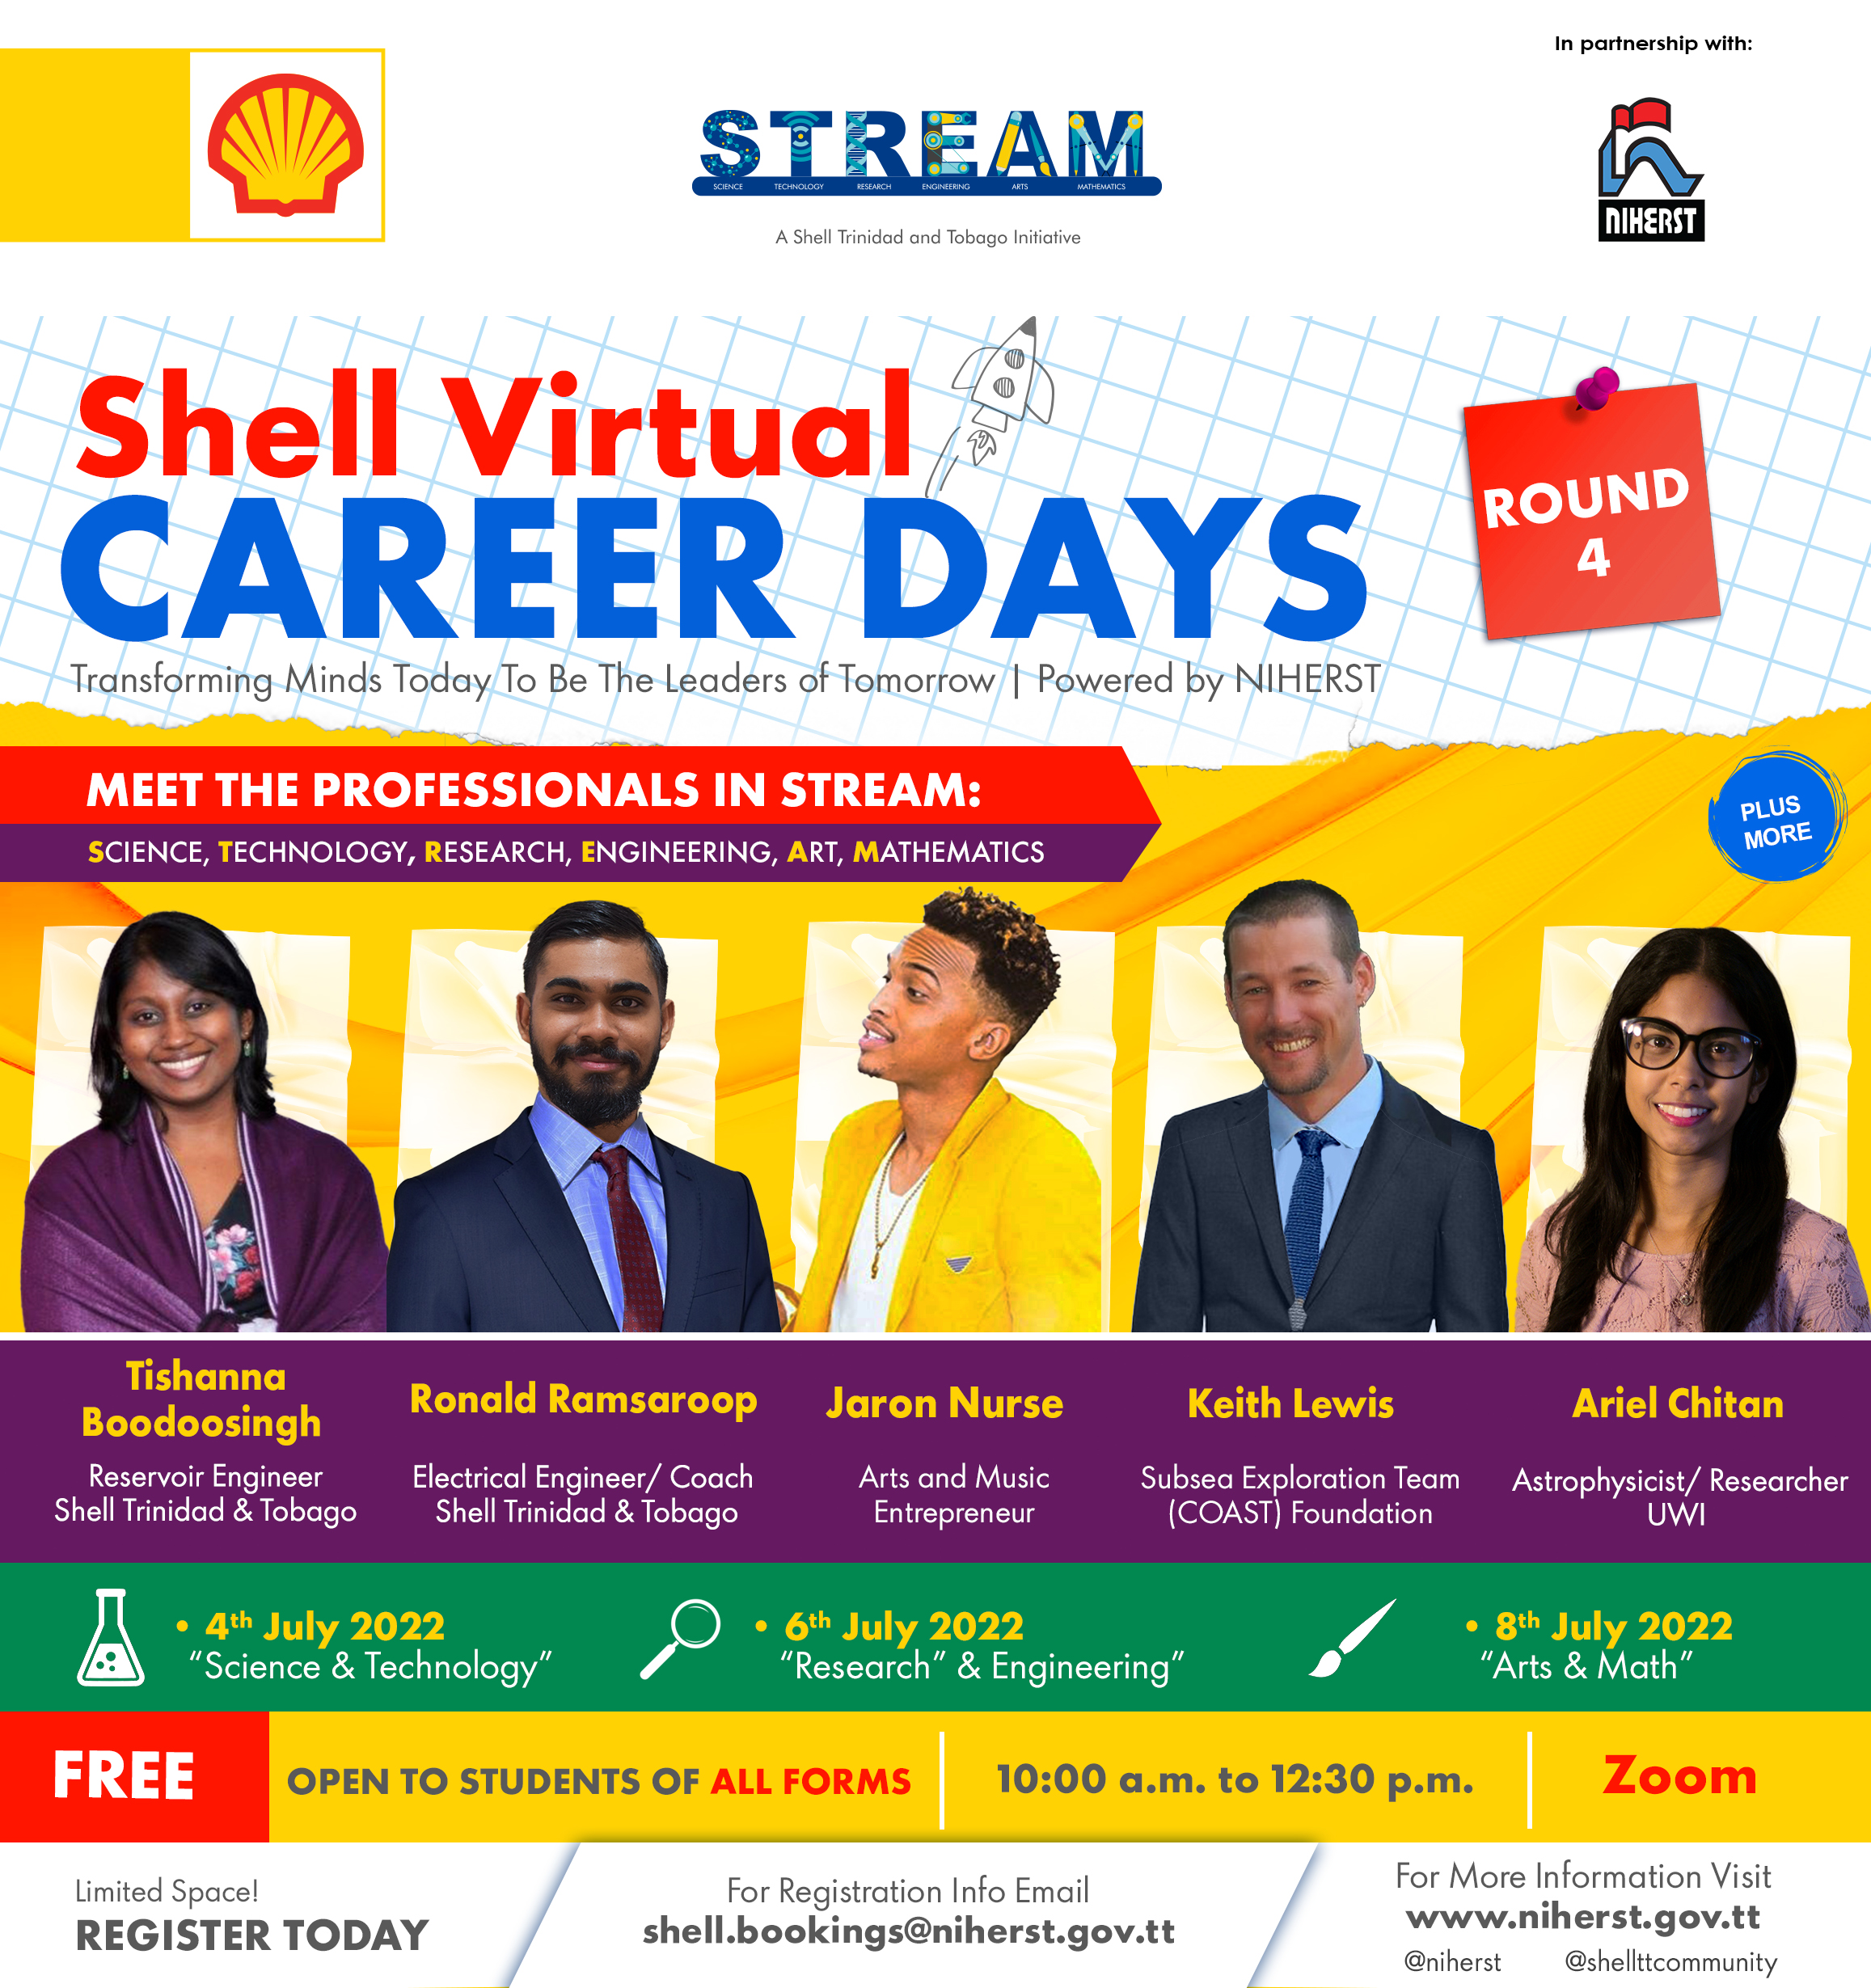 Shell Virtual Career Days - powered by NIHERST